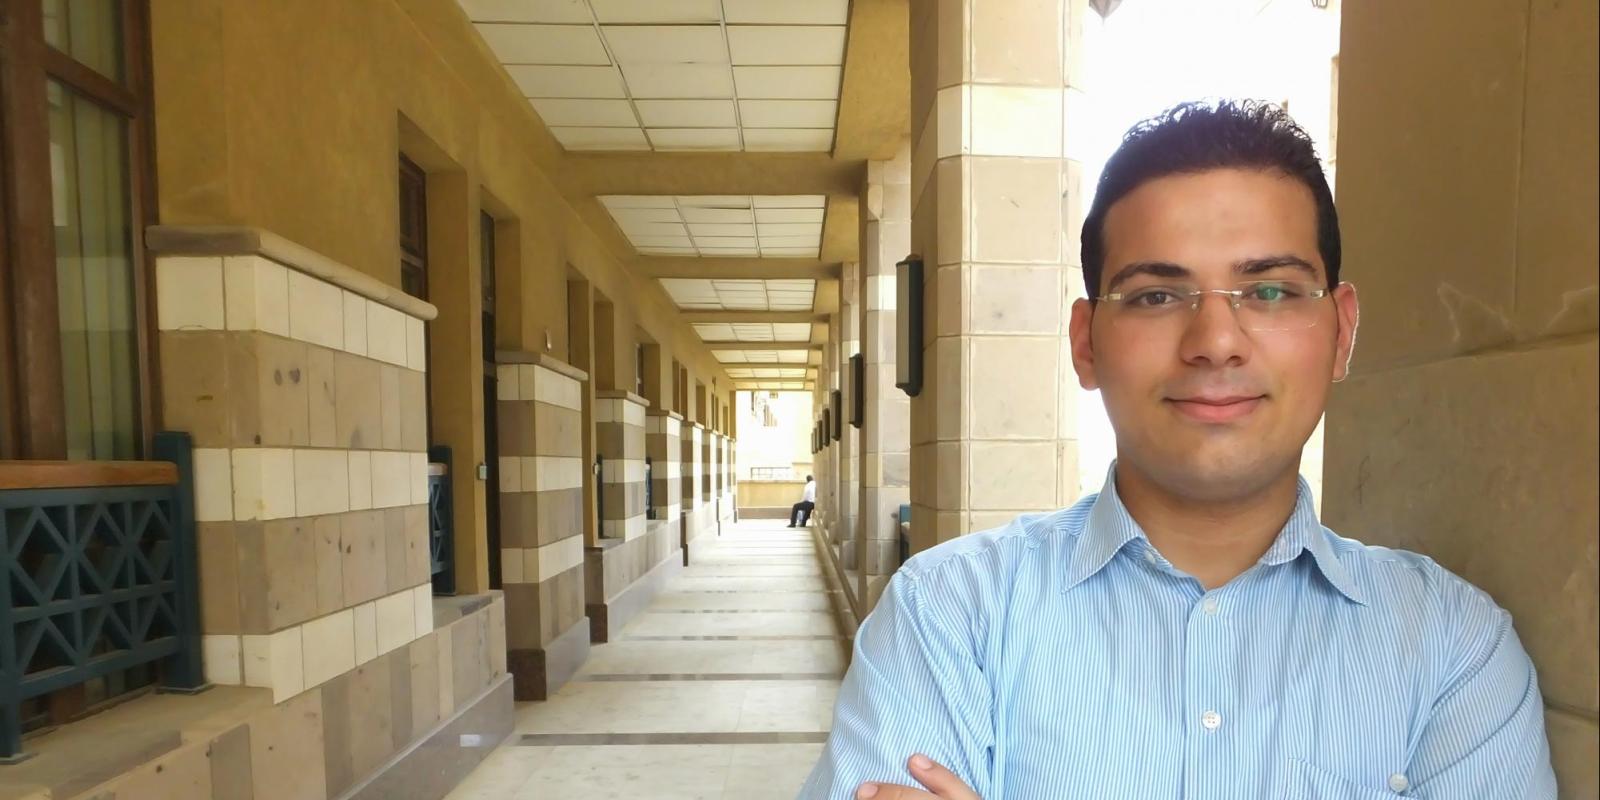 Amir Ben Ameur will represent his peers while serving on the UN-Habitat Youth Advisory Council as a Post Conflict Advisor